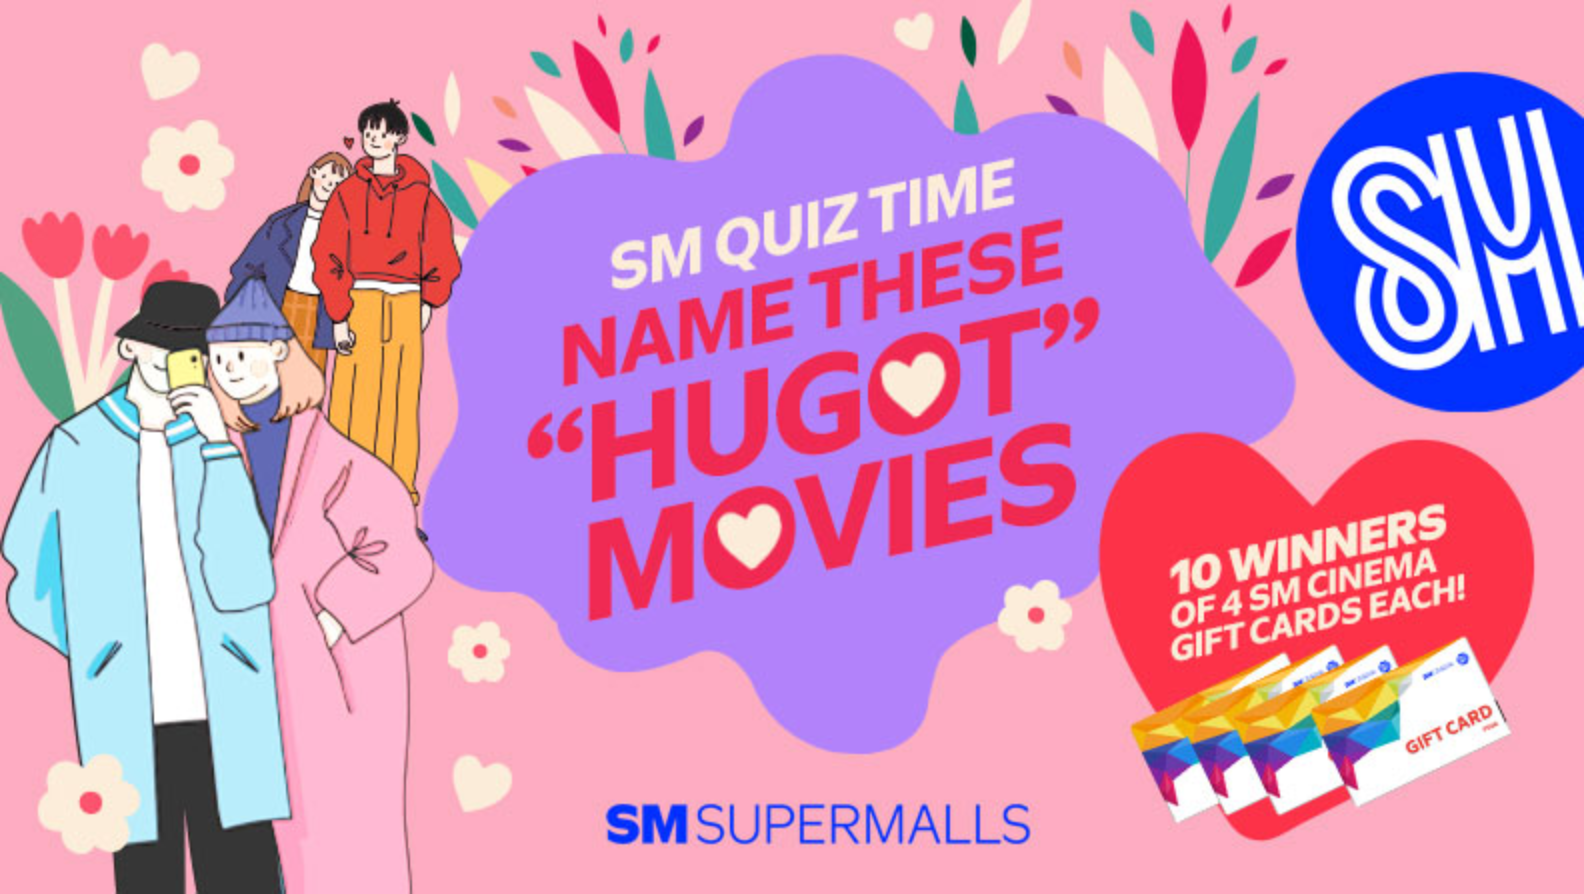 SM Quiz Time: Name These “Hugot” Movies